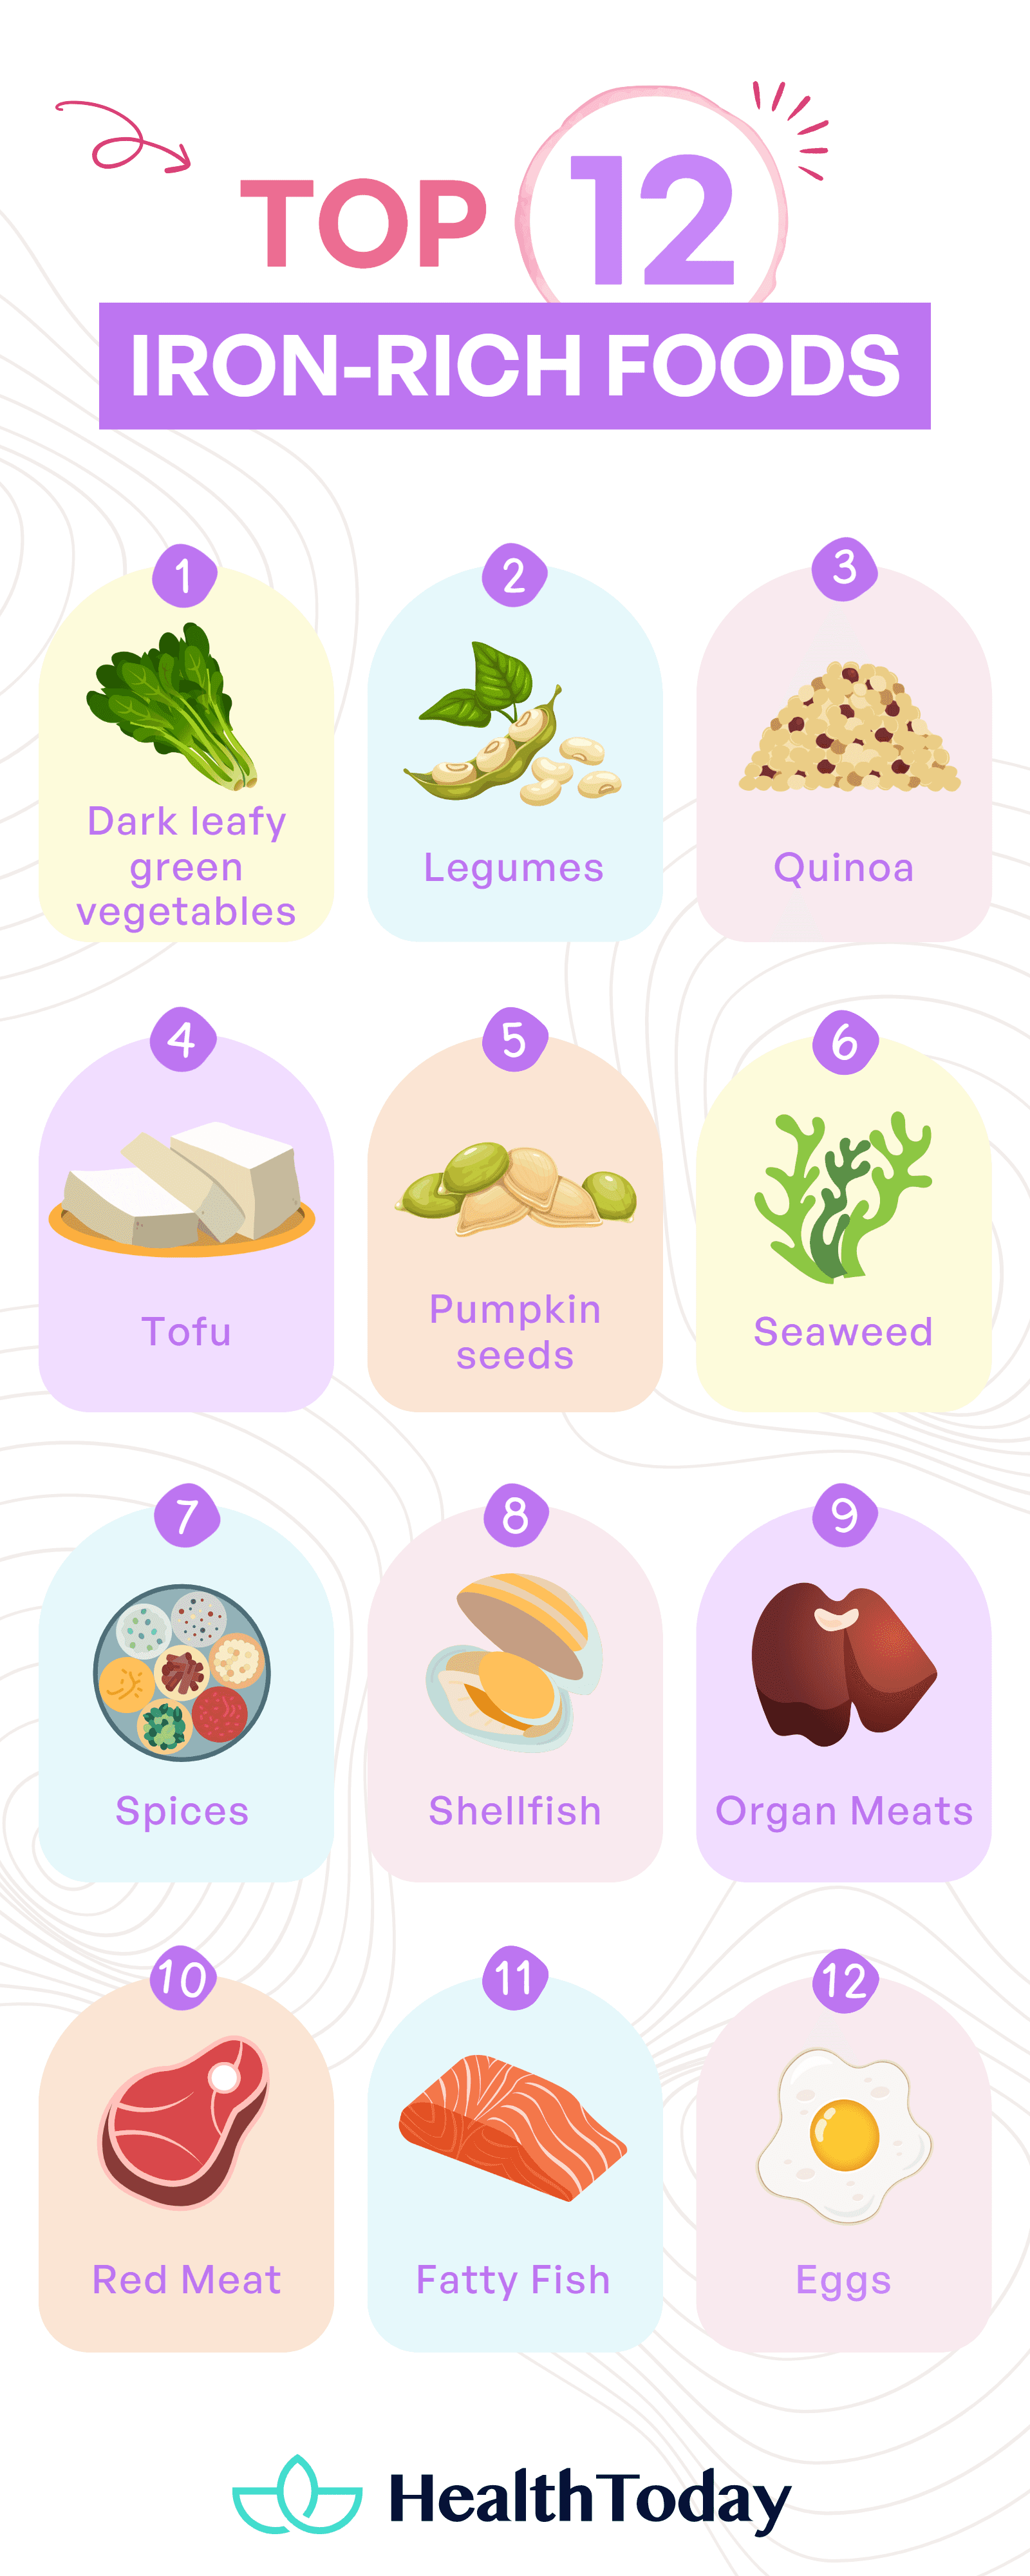 Top 12 Iron-Rich Foods